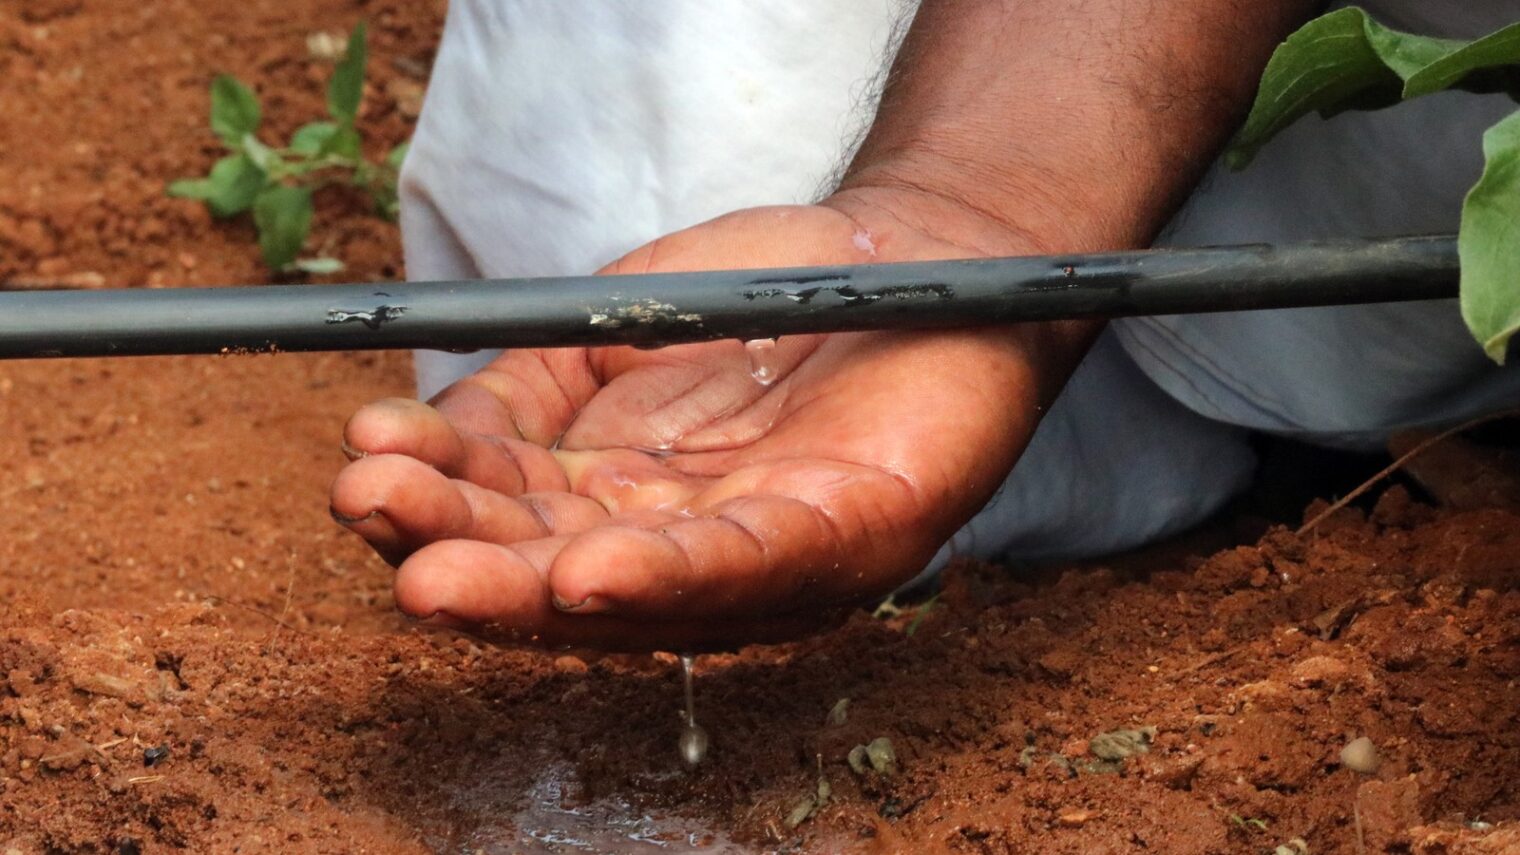 Drop by drop, precise irrigation saves water and increases yield. Photo courtesy of Netafim